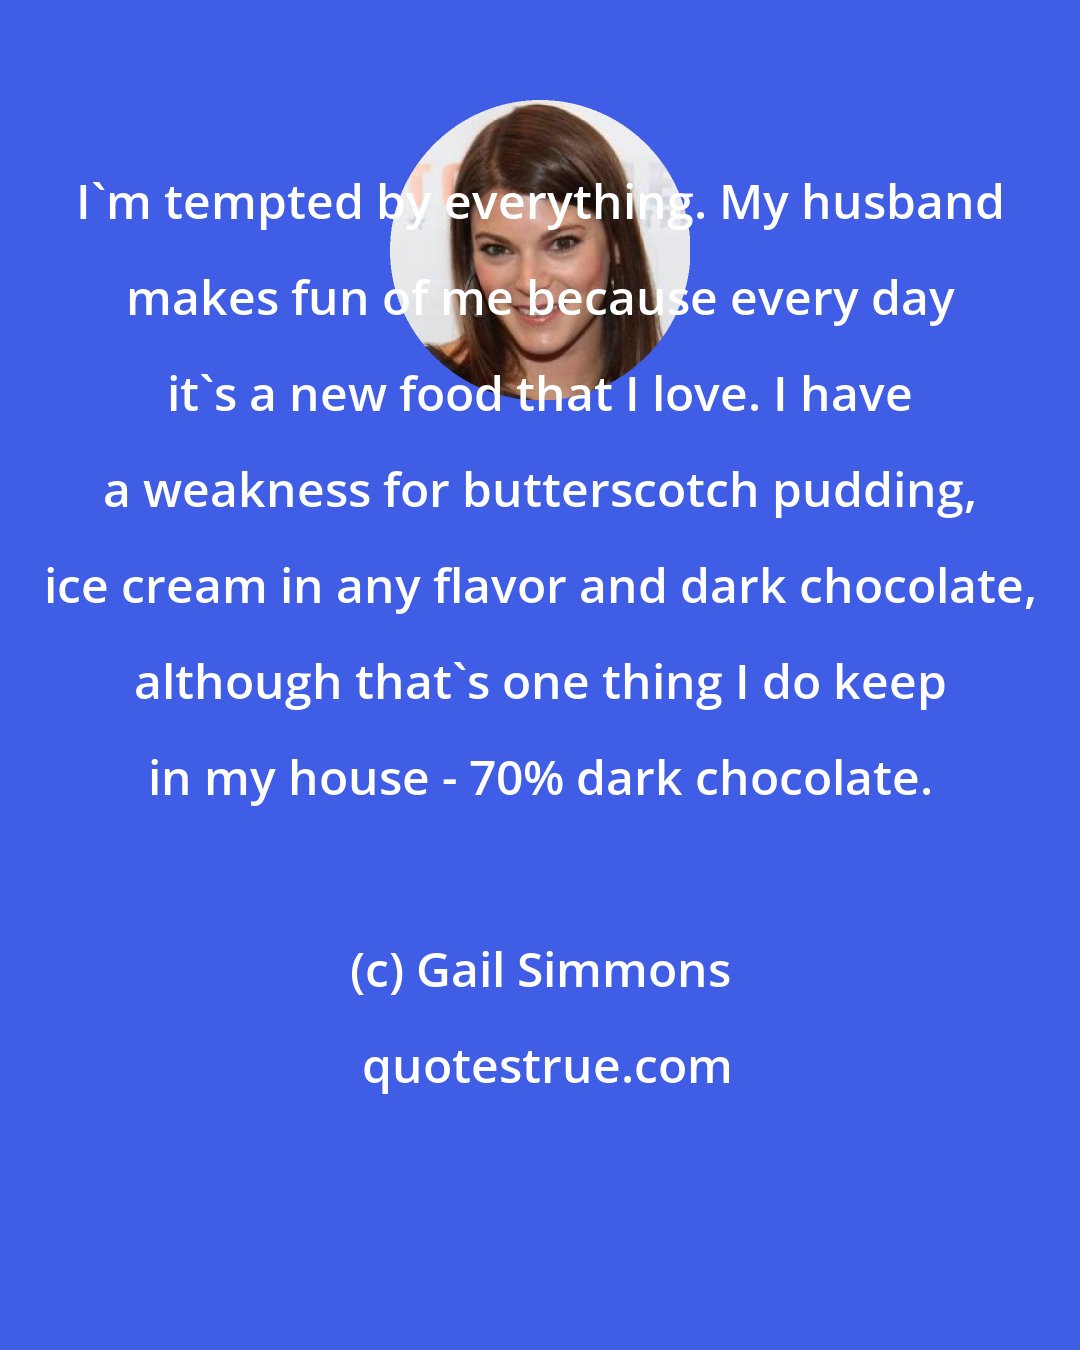 Gail Simmons: I'm tempted by everything. My husband makes fun of me because every day it's a new food that I love. I have a weakness for butterscotch pudding, ice cream in any flavor and dark chocolate, although that's one thing I do keep in my house - 70% dark chocolate.